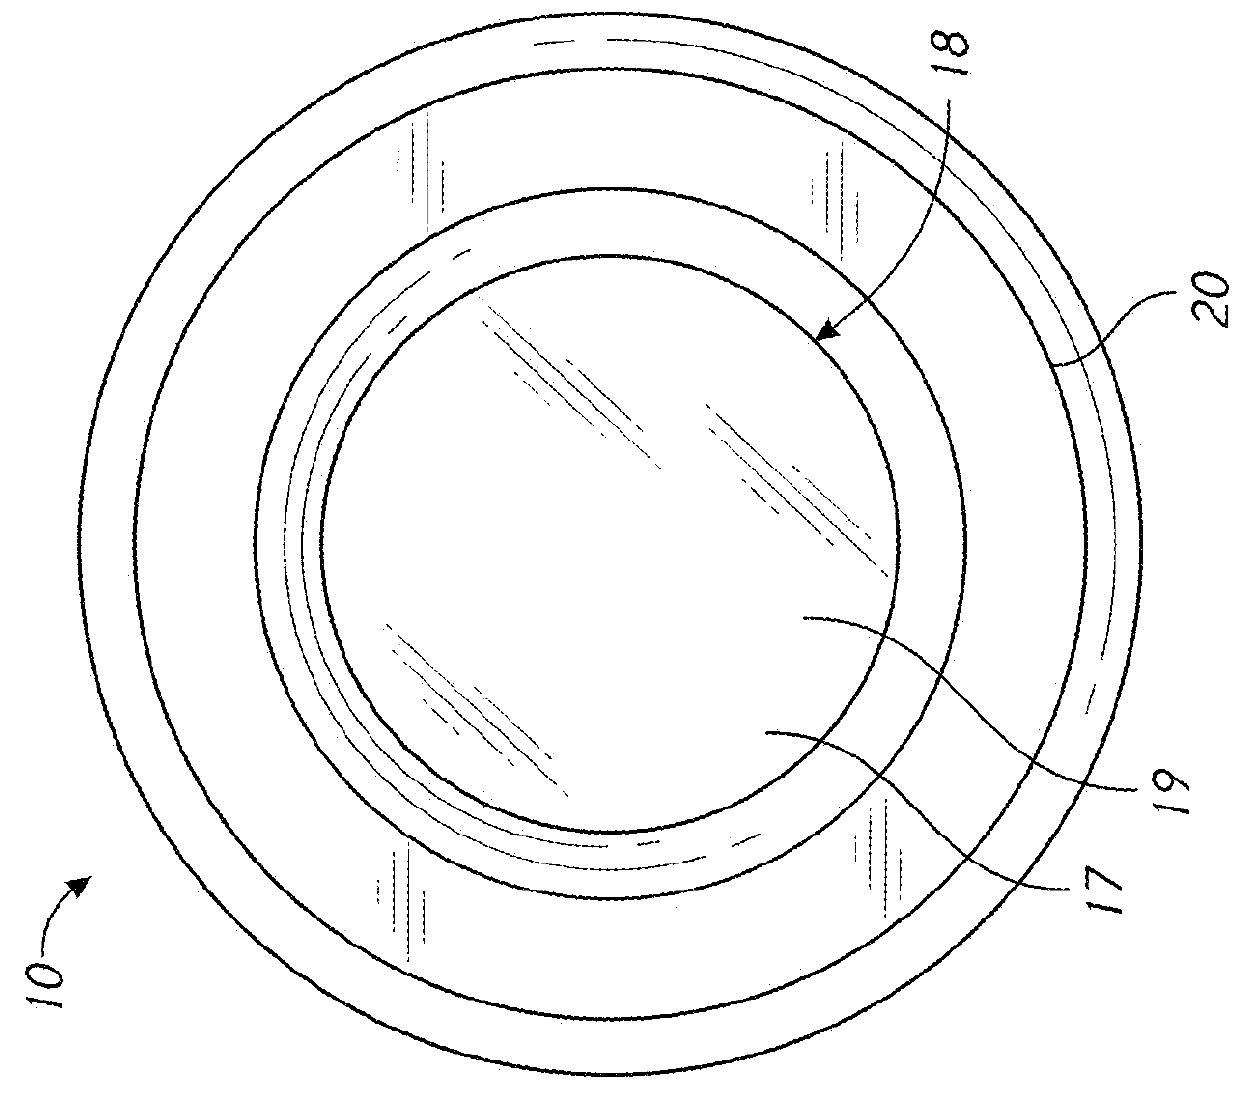 Prosthetic capsular devices, systems, and methods